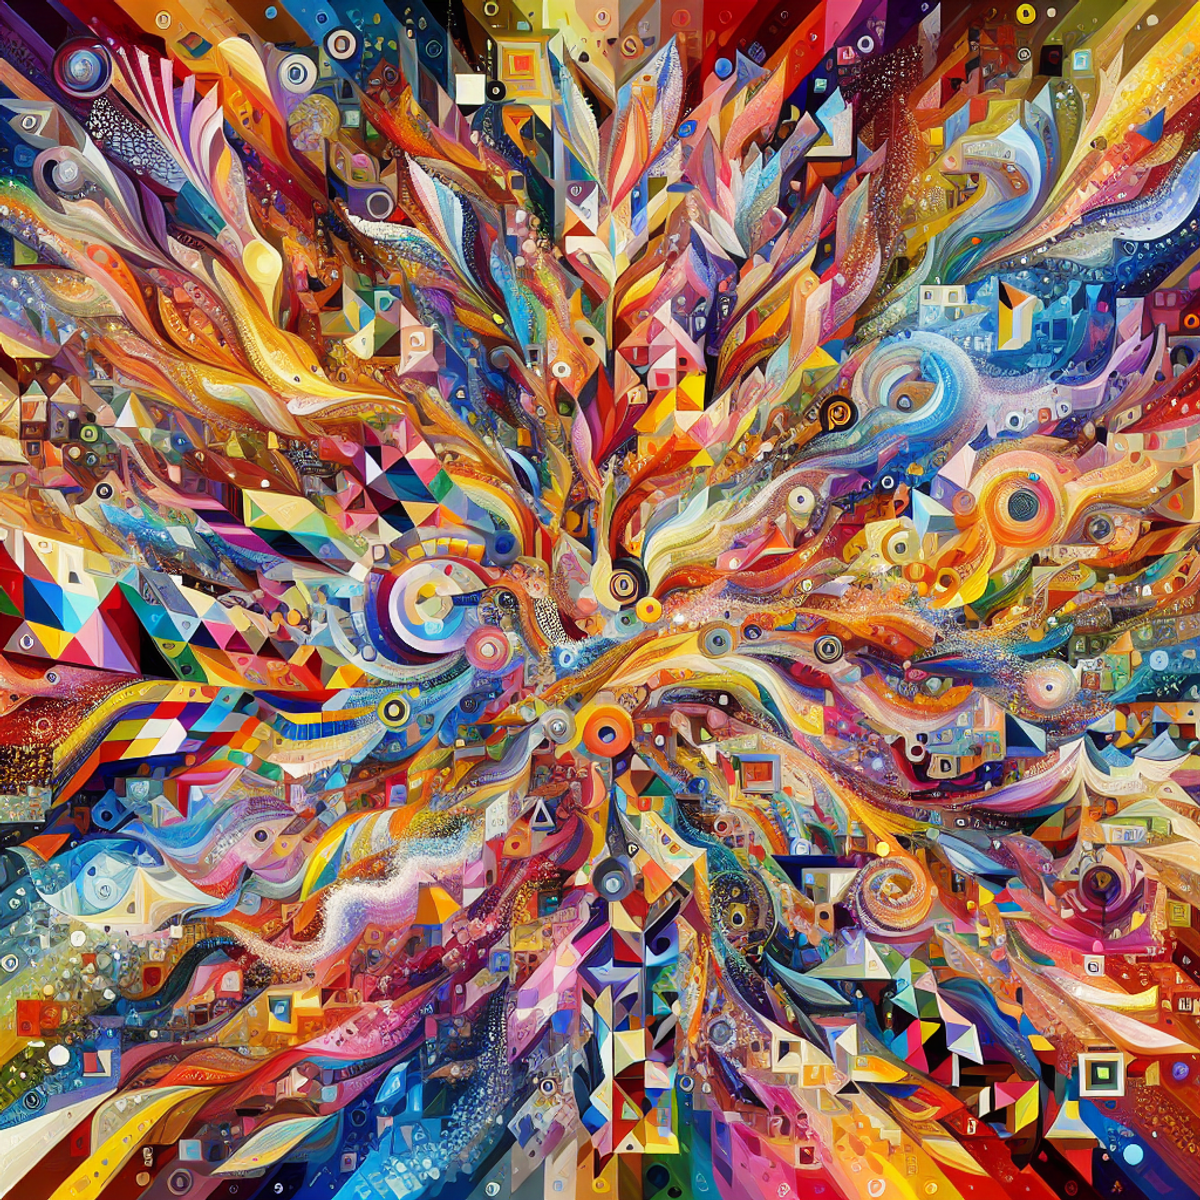 Abstract explosion of colorful geometric shapes and patterns.